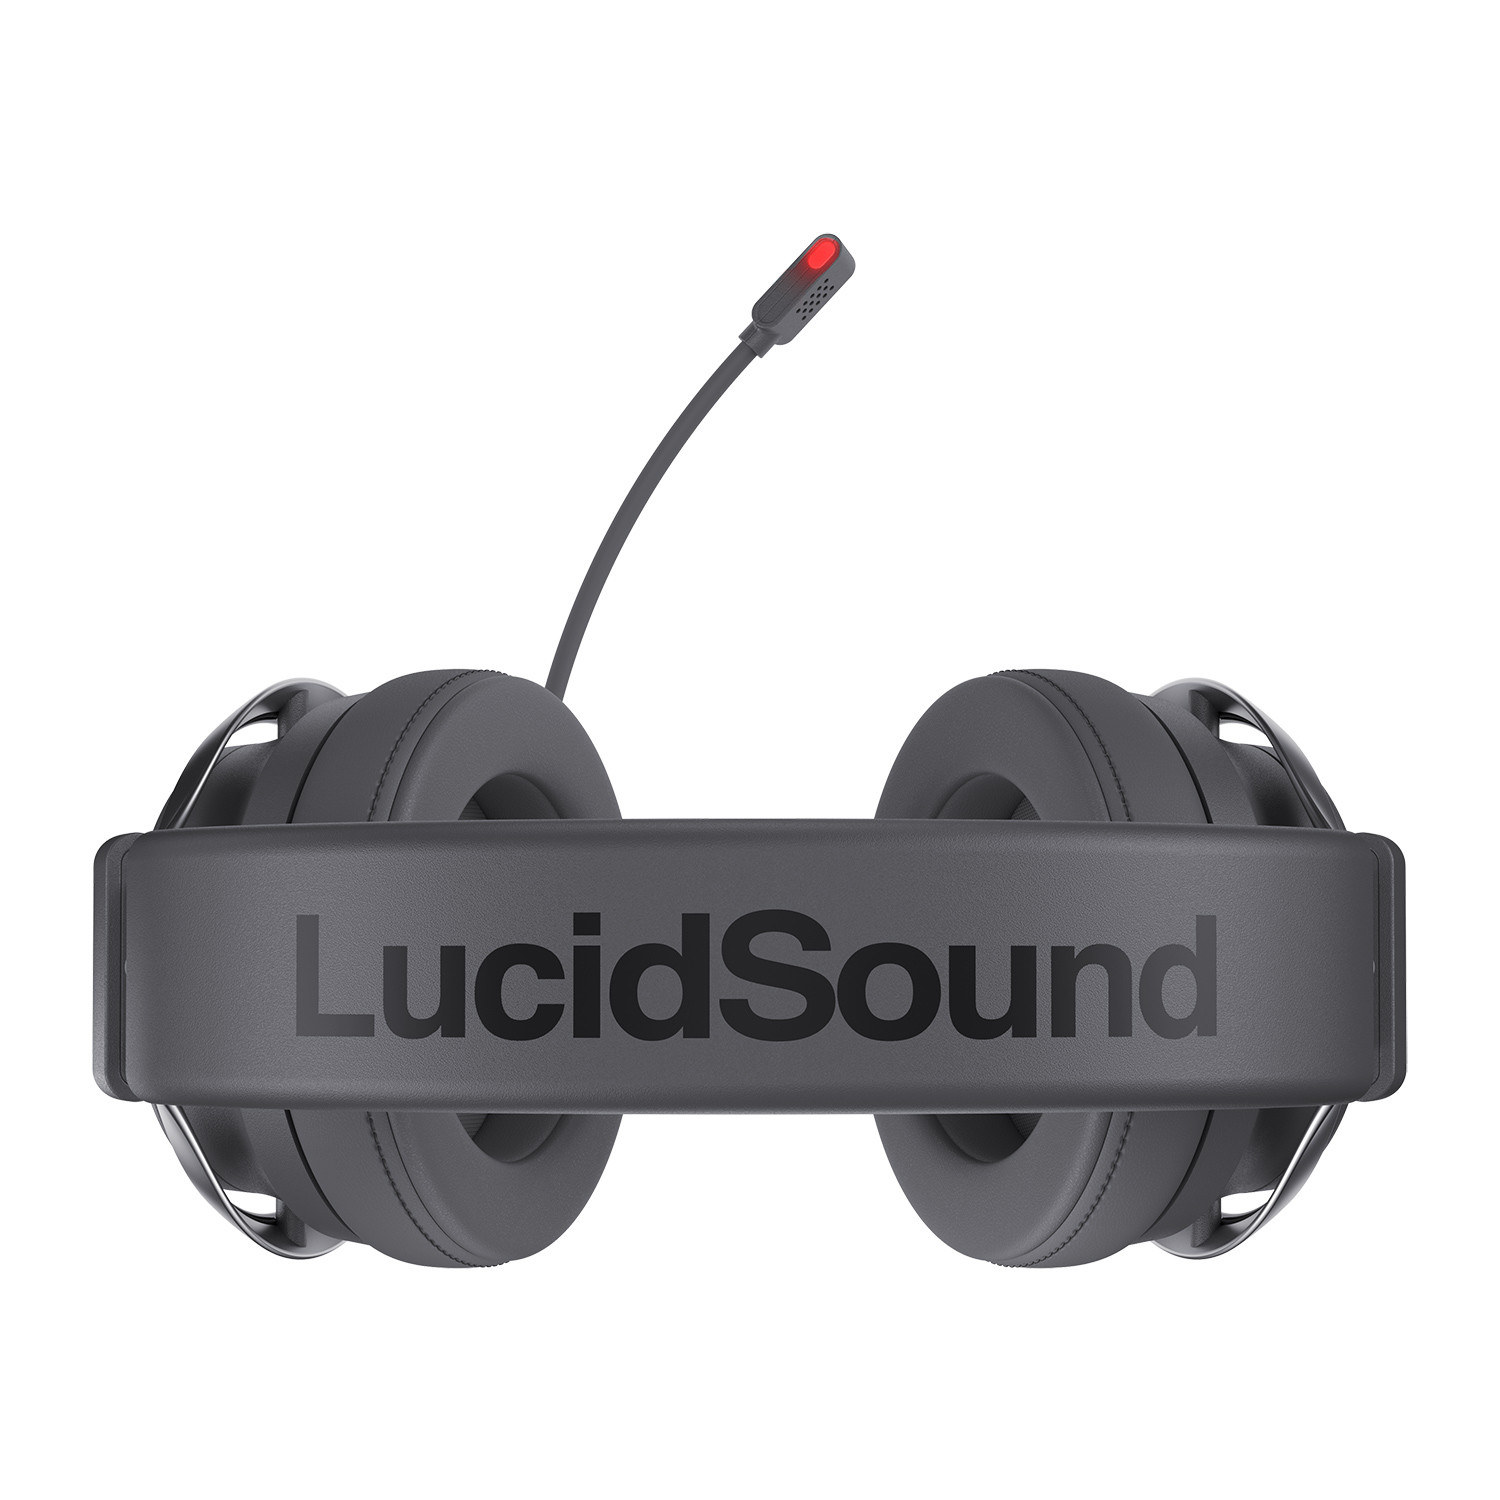 Lucidsound Ships Ls31 Wireless Gaming Headset For Ps4 Xbox One And Pc Techpowerup